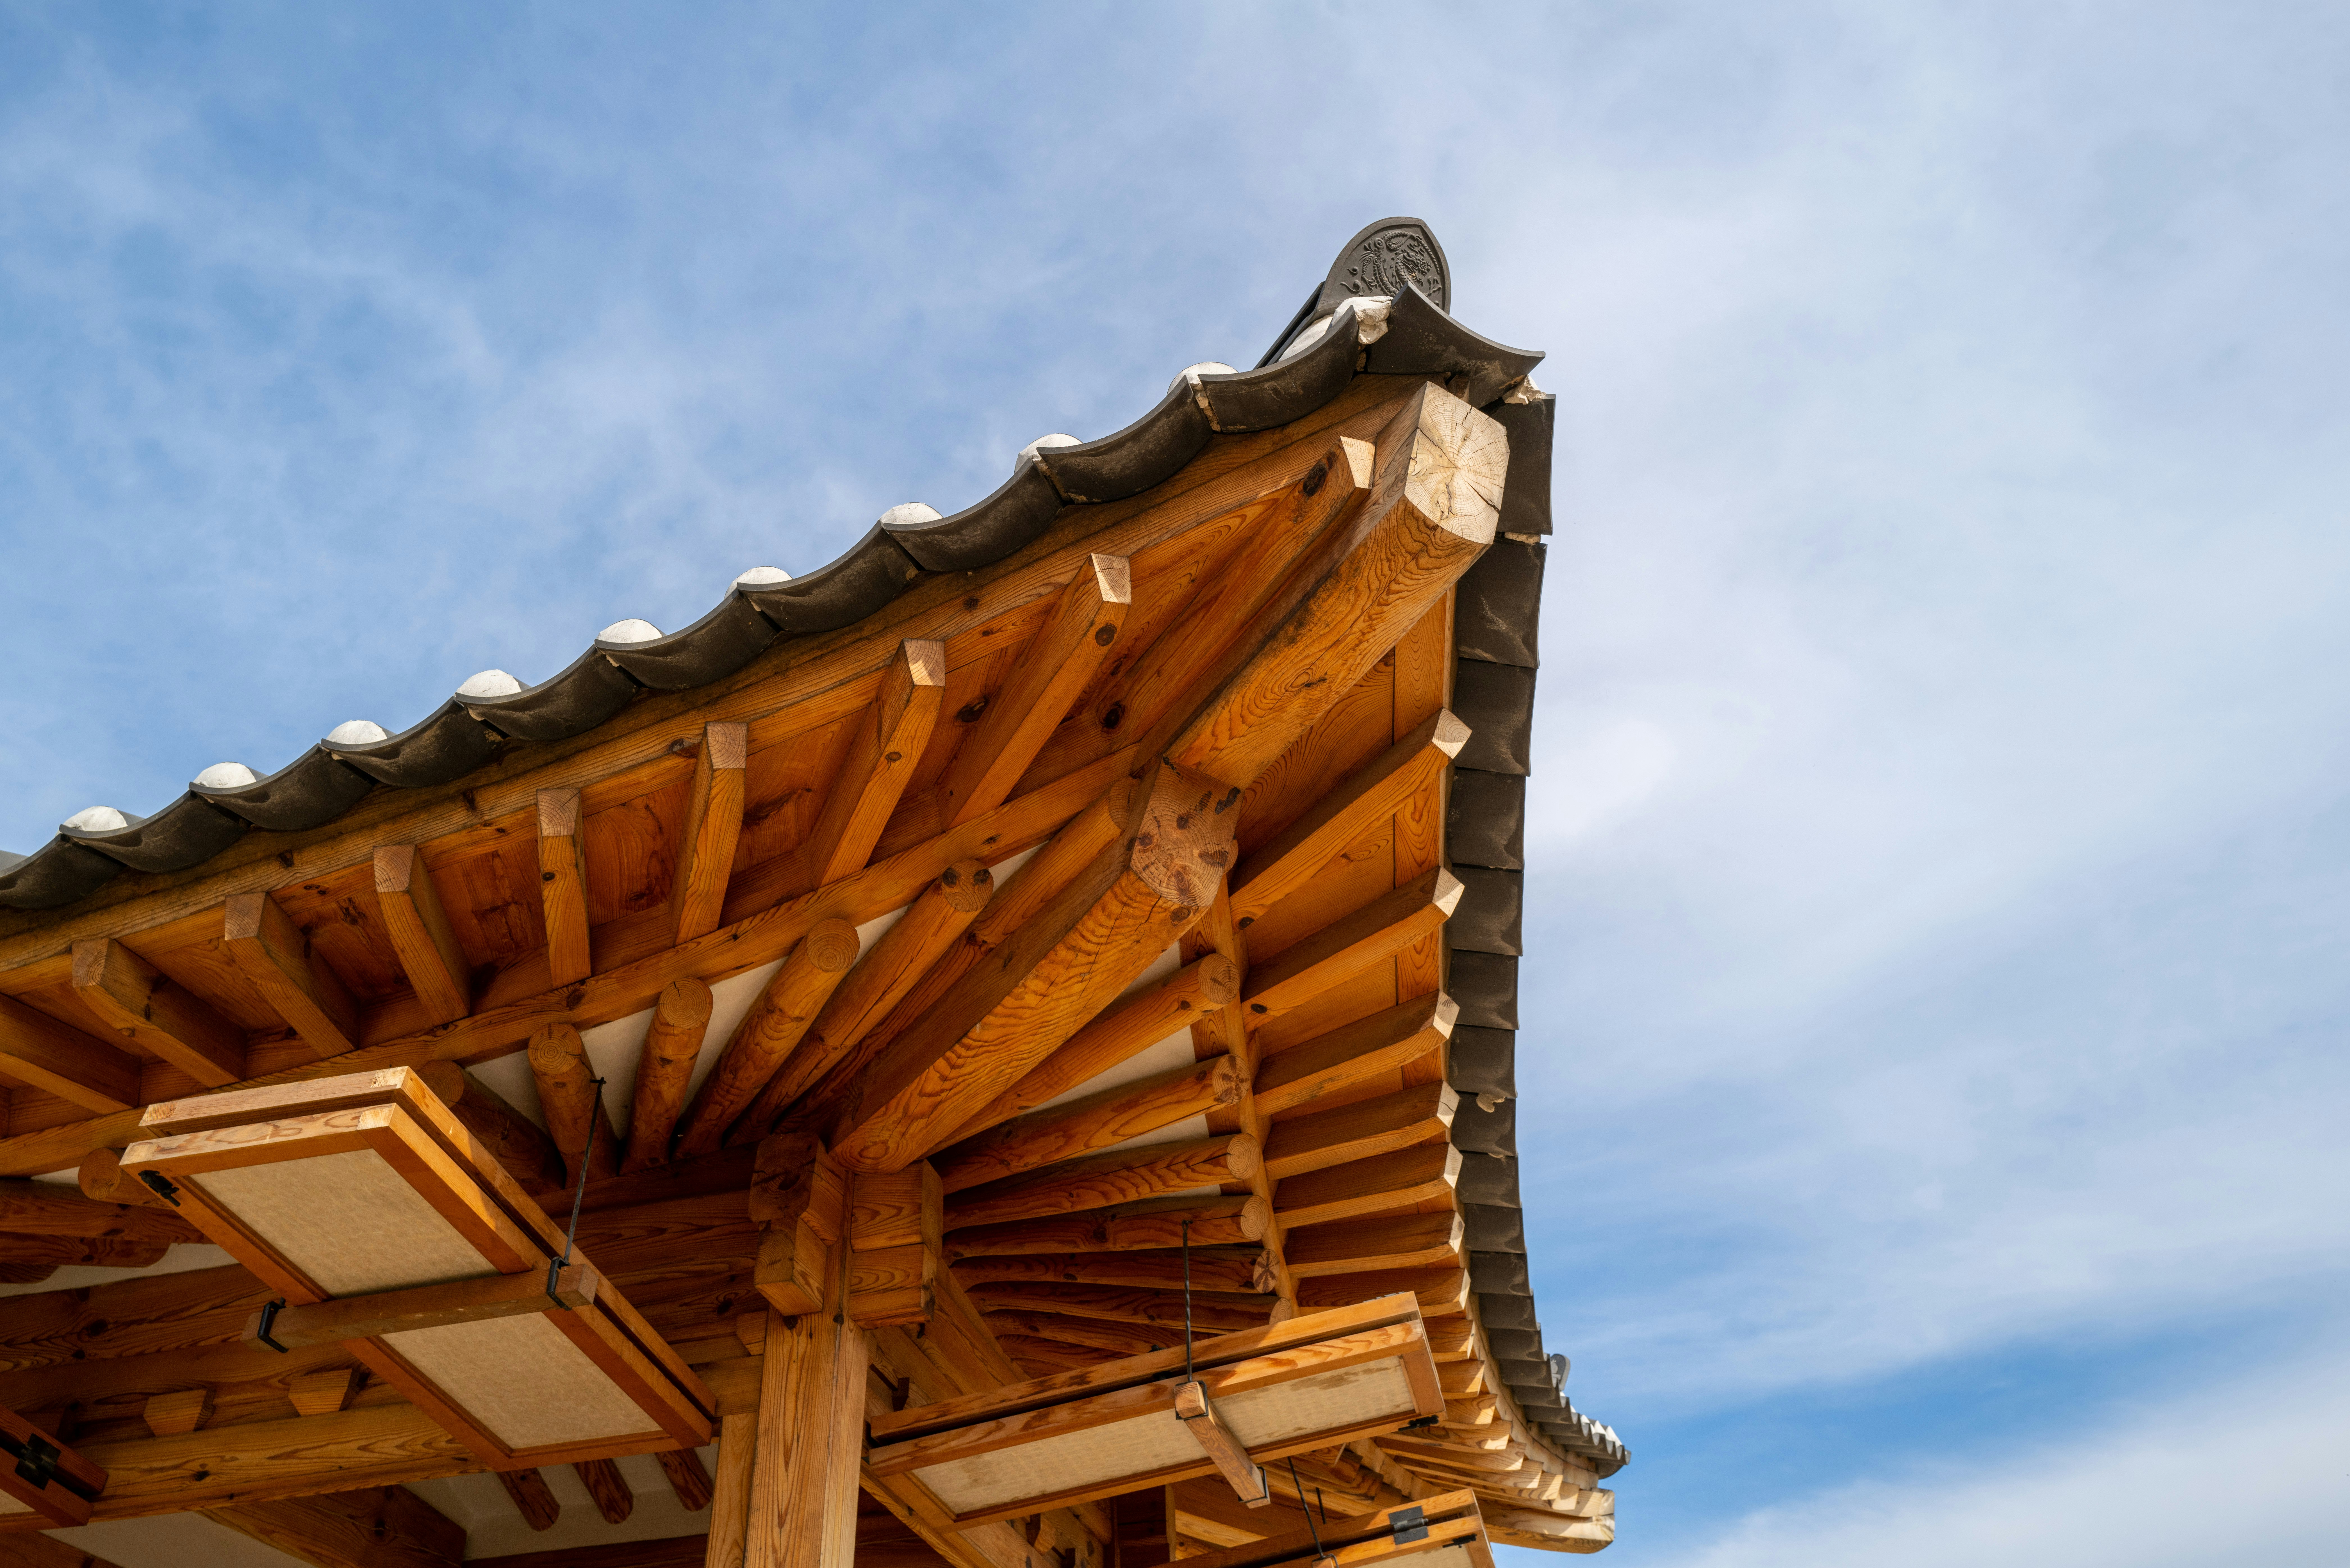 brown wooden roof under blue sky during daytime